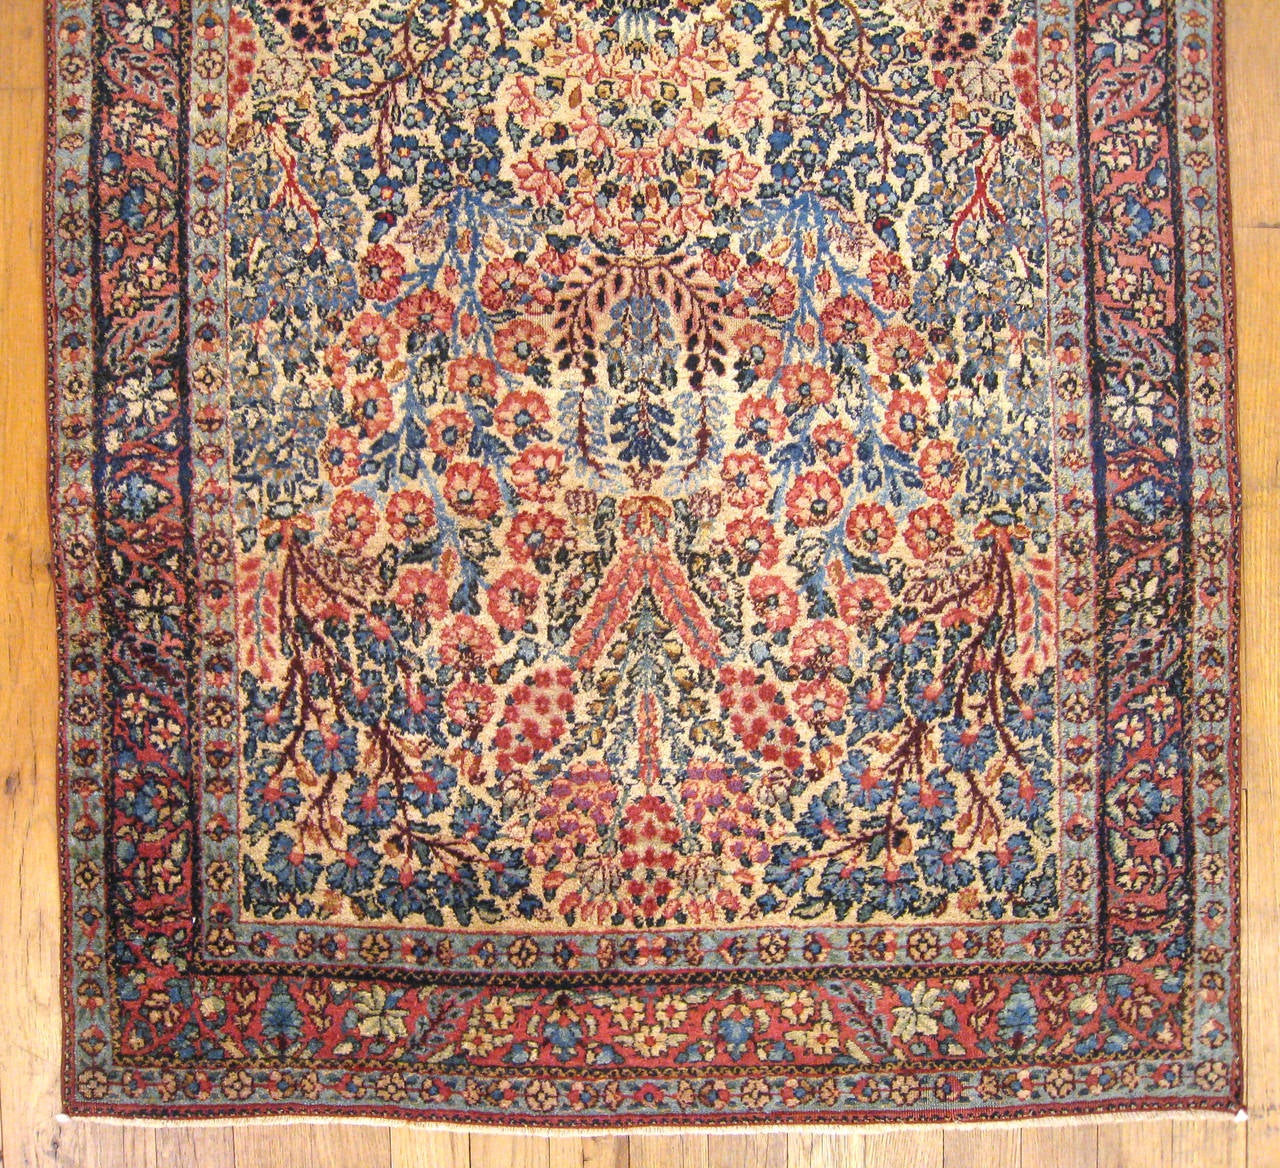 Hand-Knotted Antique Persian Kerman Oriental Rug, circa 1900